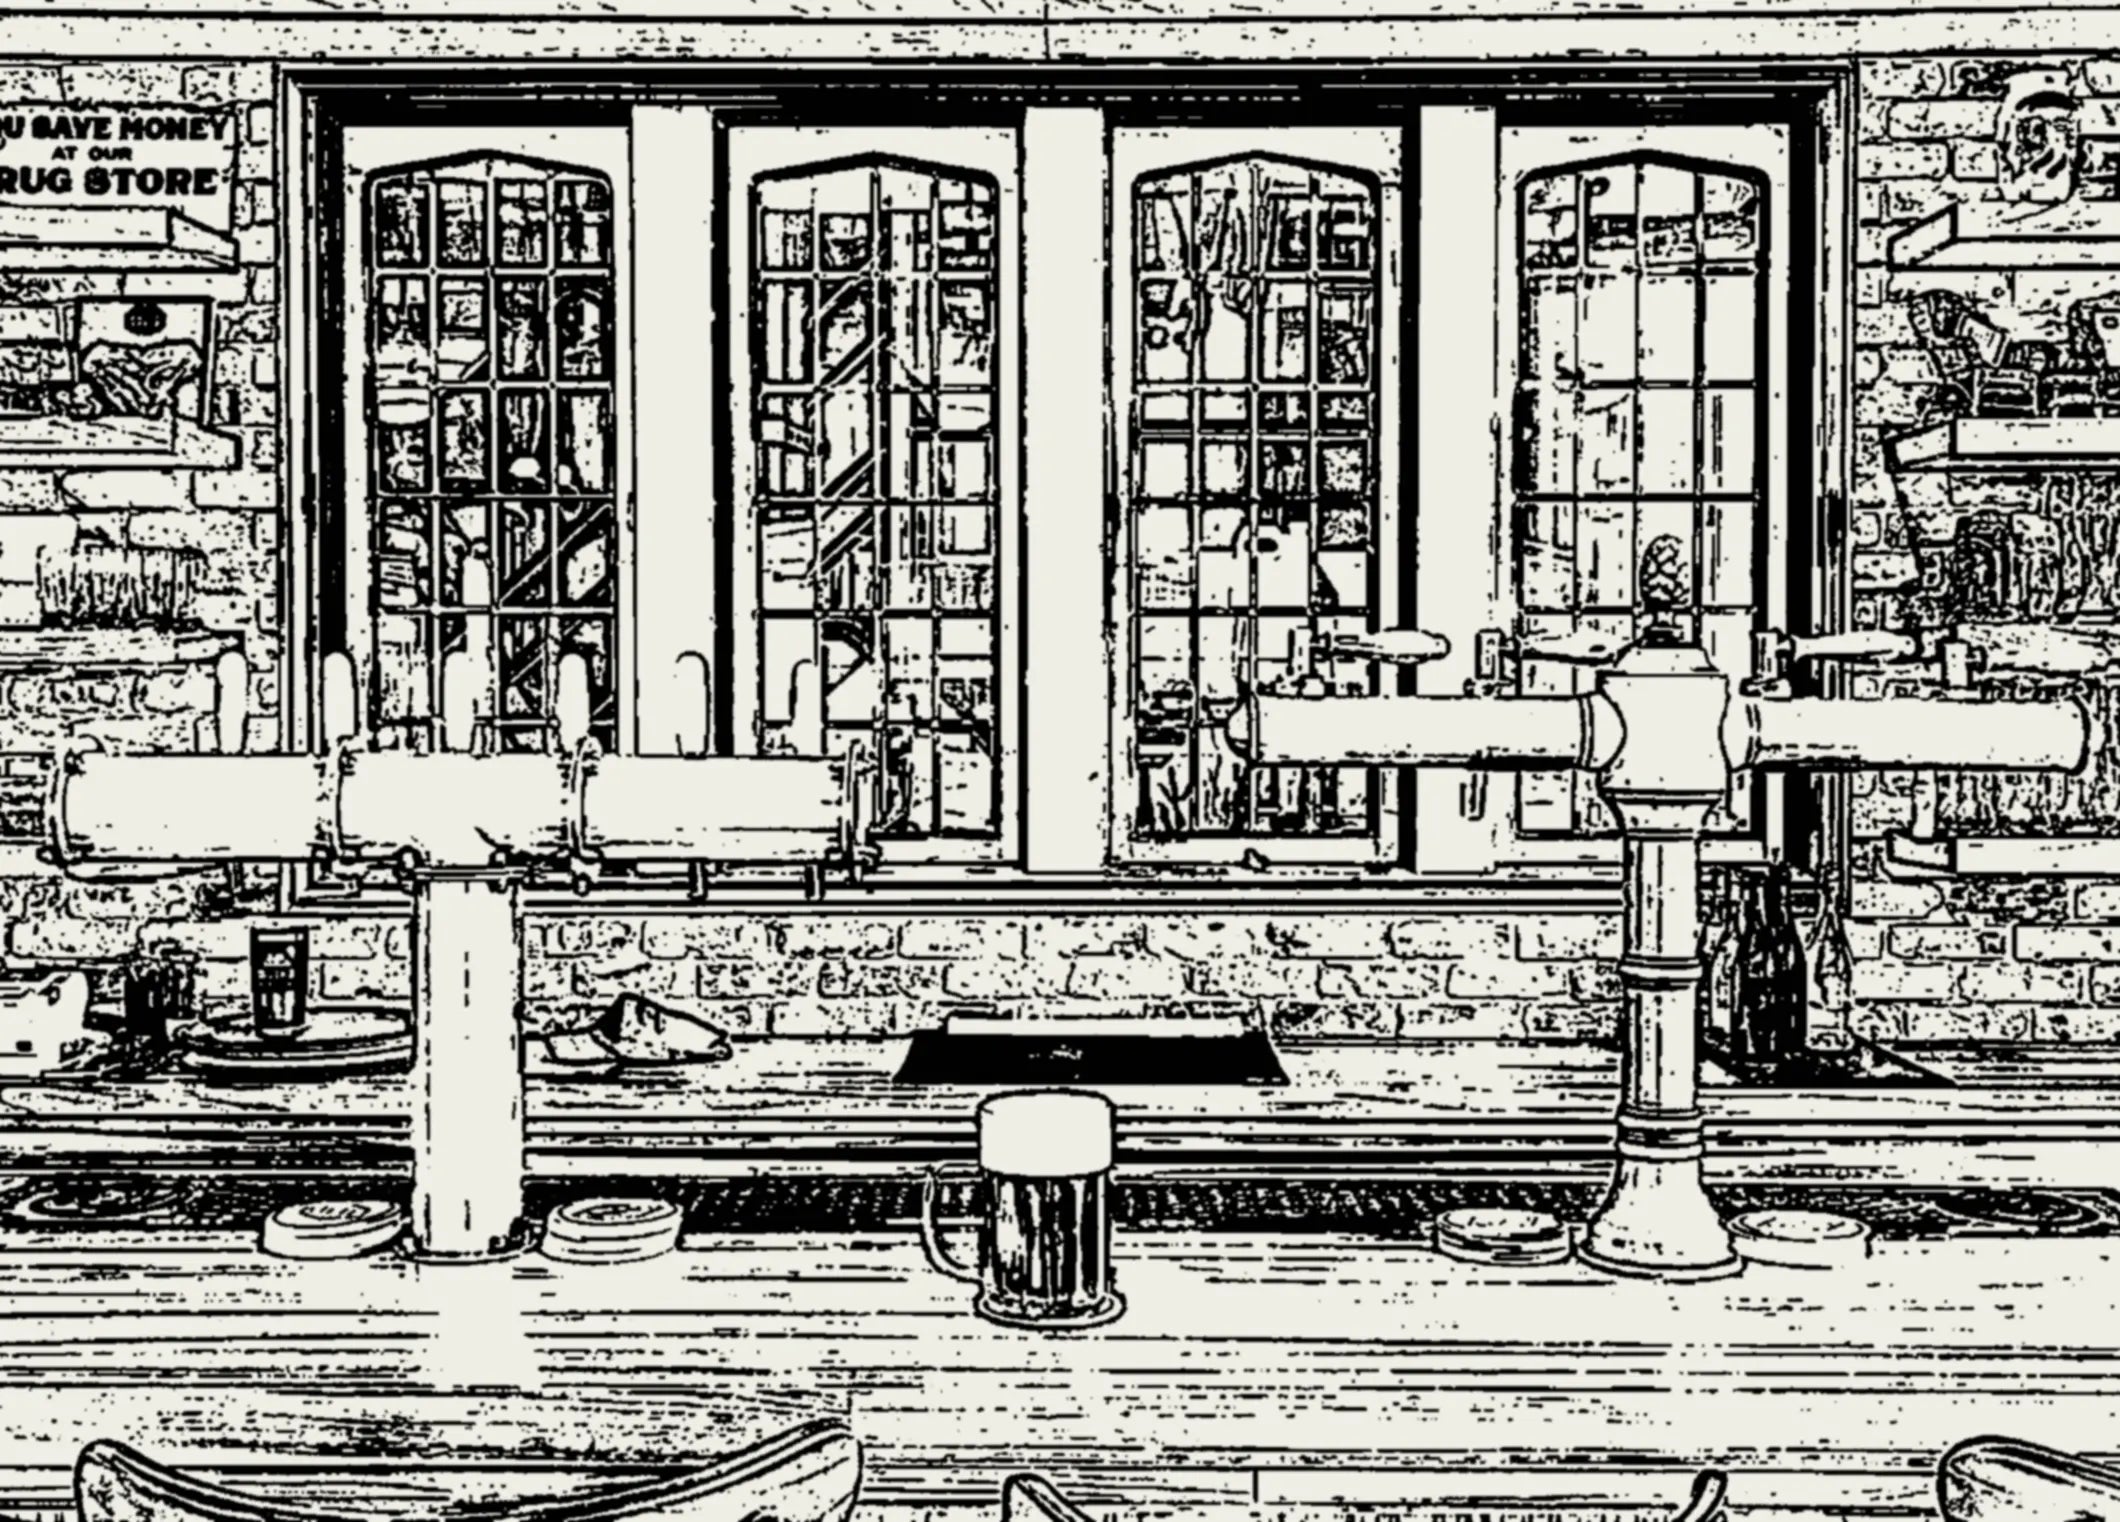 A black and white sketch of the True History taproom